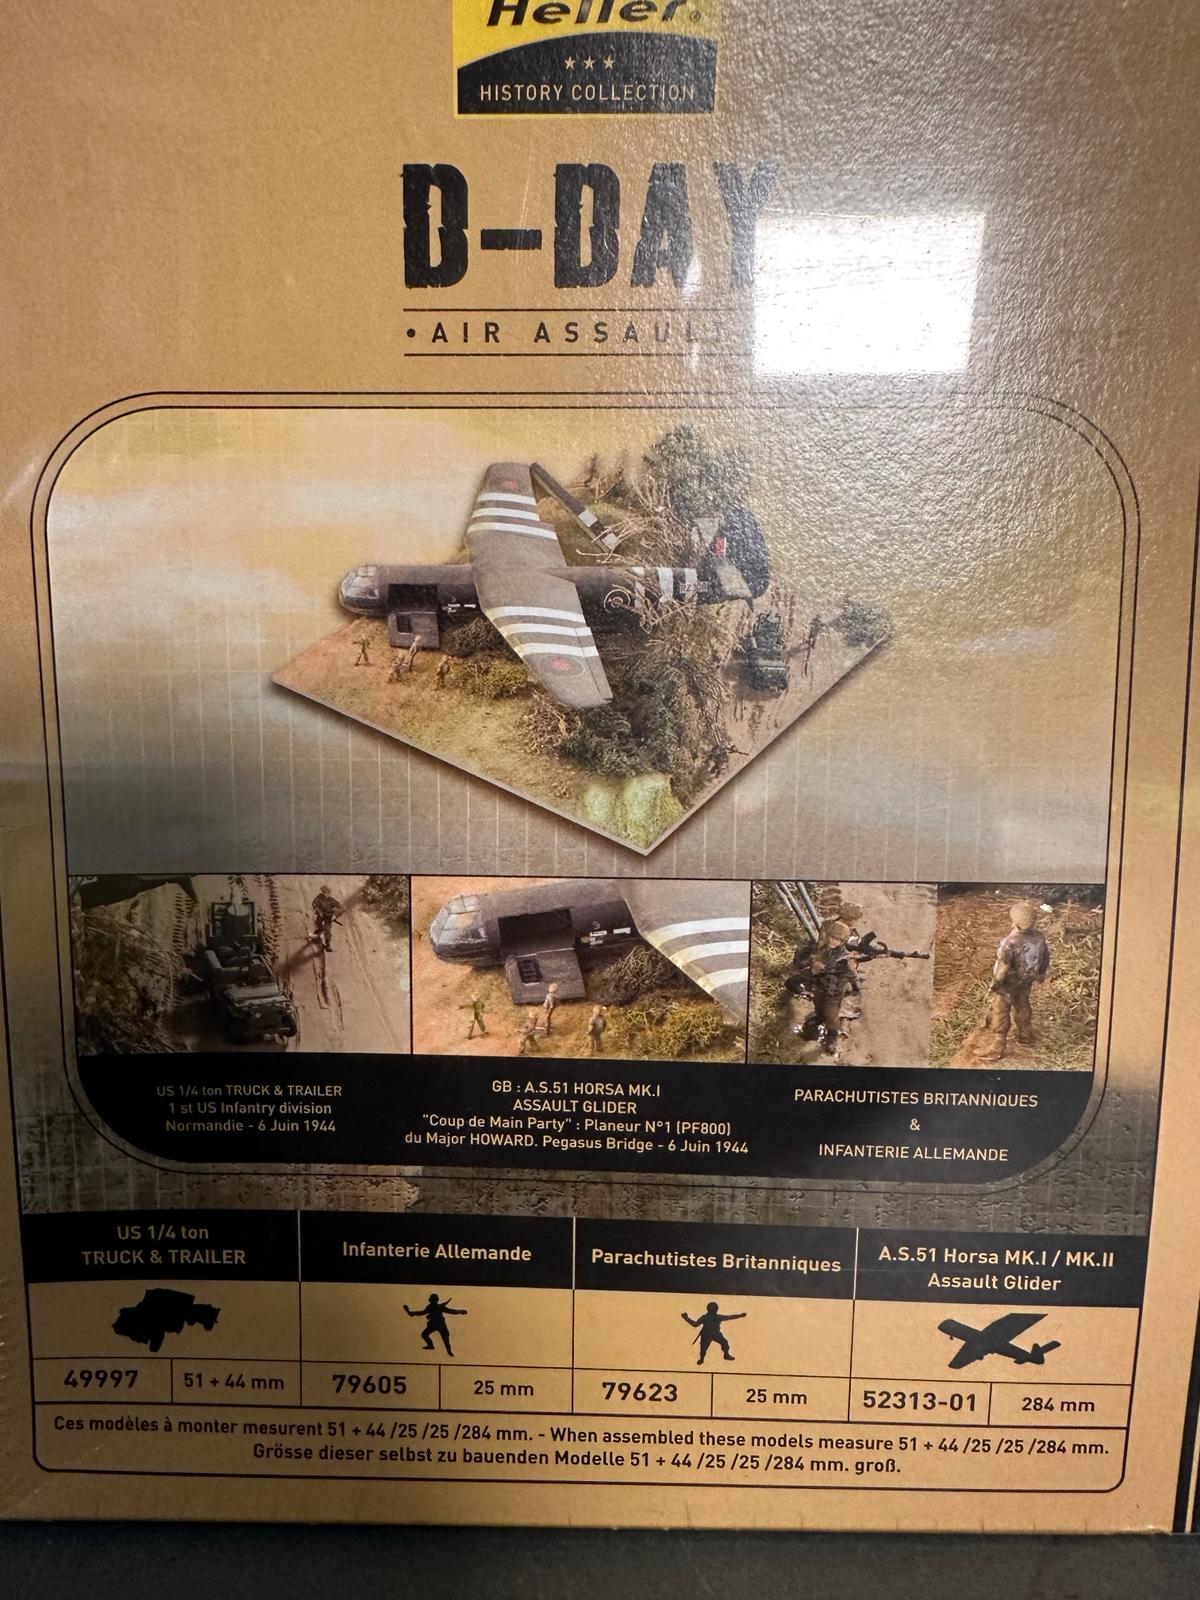 A Heller history collection D-Day Air Assault model kit - Image 2 of 5